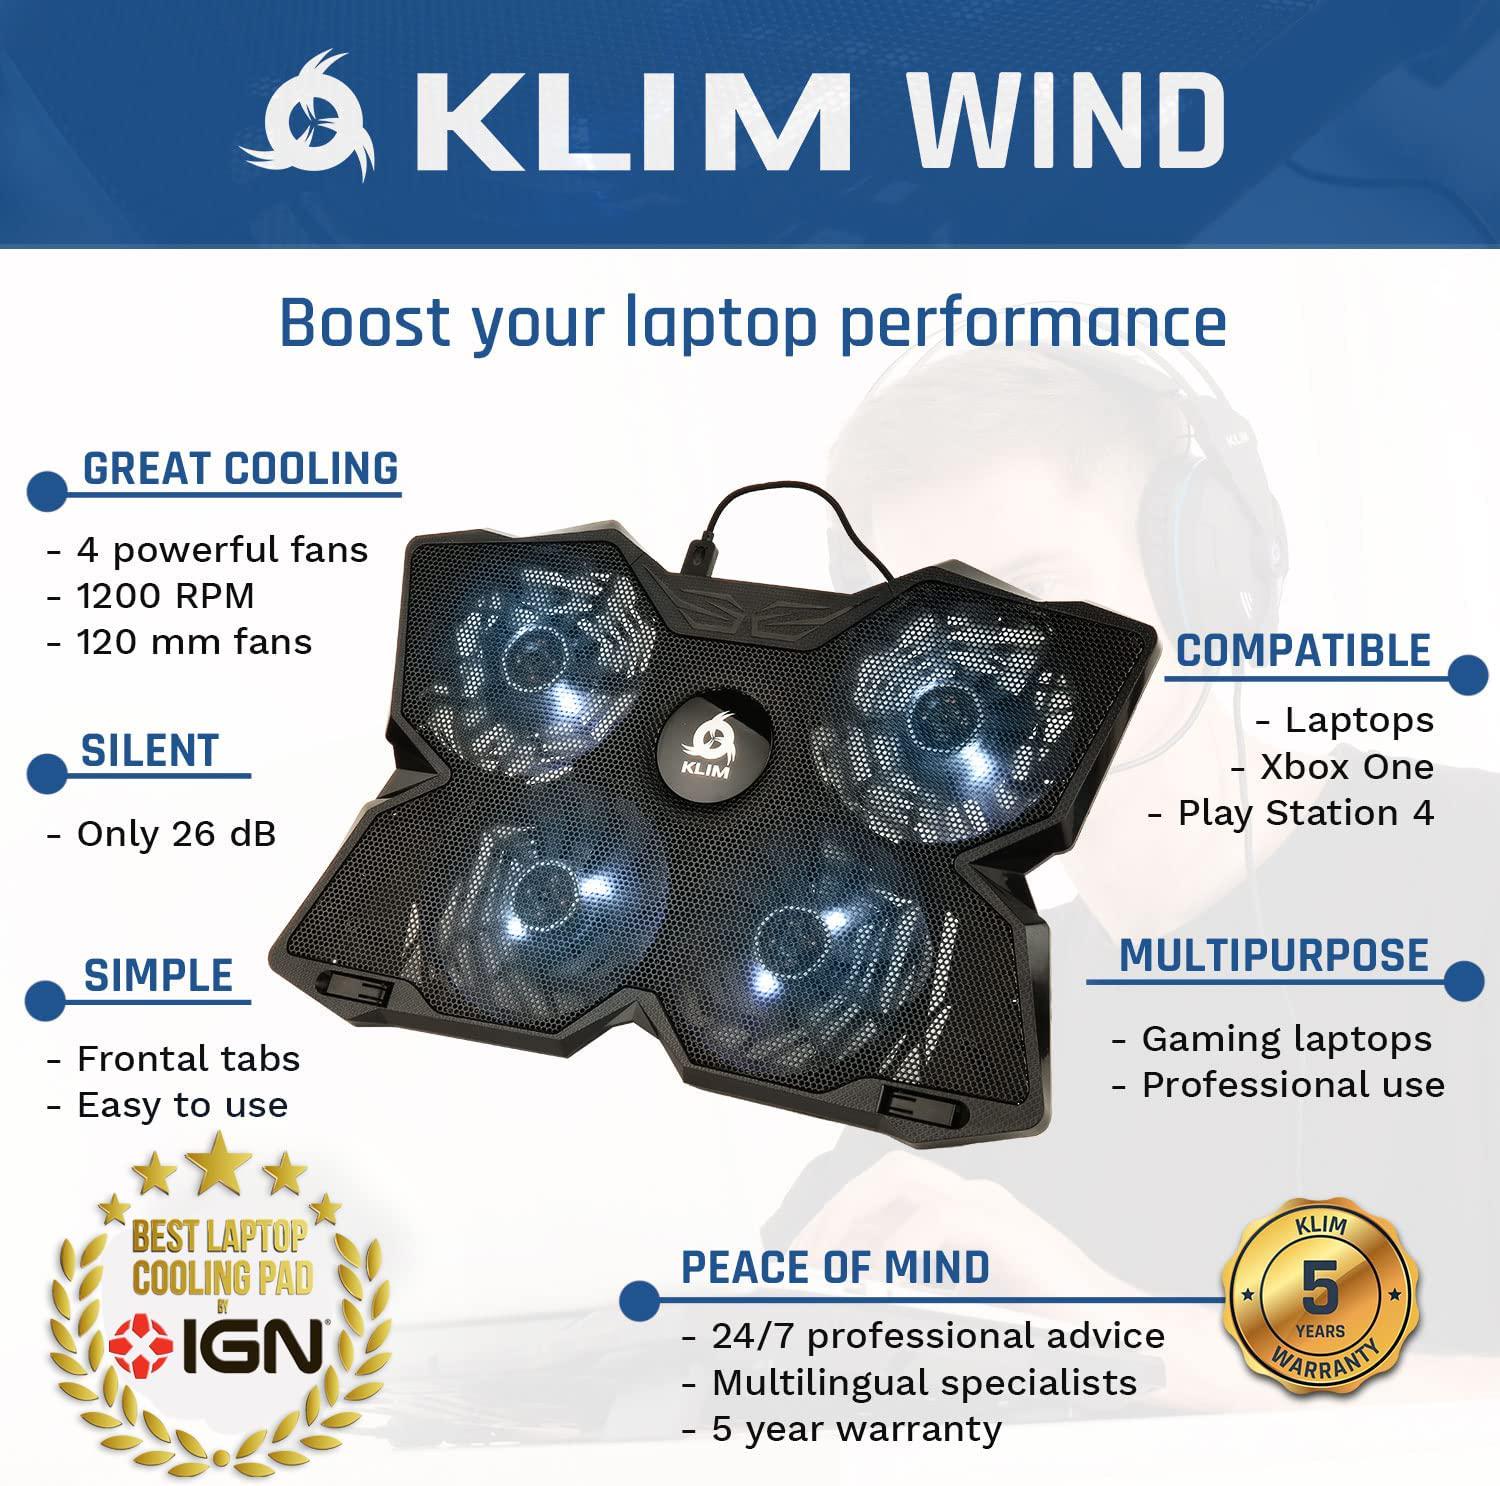 KLIM, KLIM Wind - Laptop Cooling Pad - The Most Powerful Rapid Action Cooling Fan - PS5, PS4 and Laptop Stand with 4 Cooling Fans at 1200 RPM - USB Fan - Compatible with All Size - New 2022 Version - White